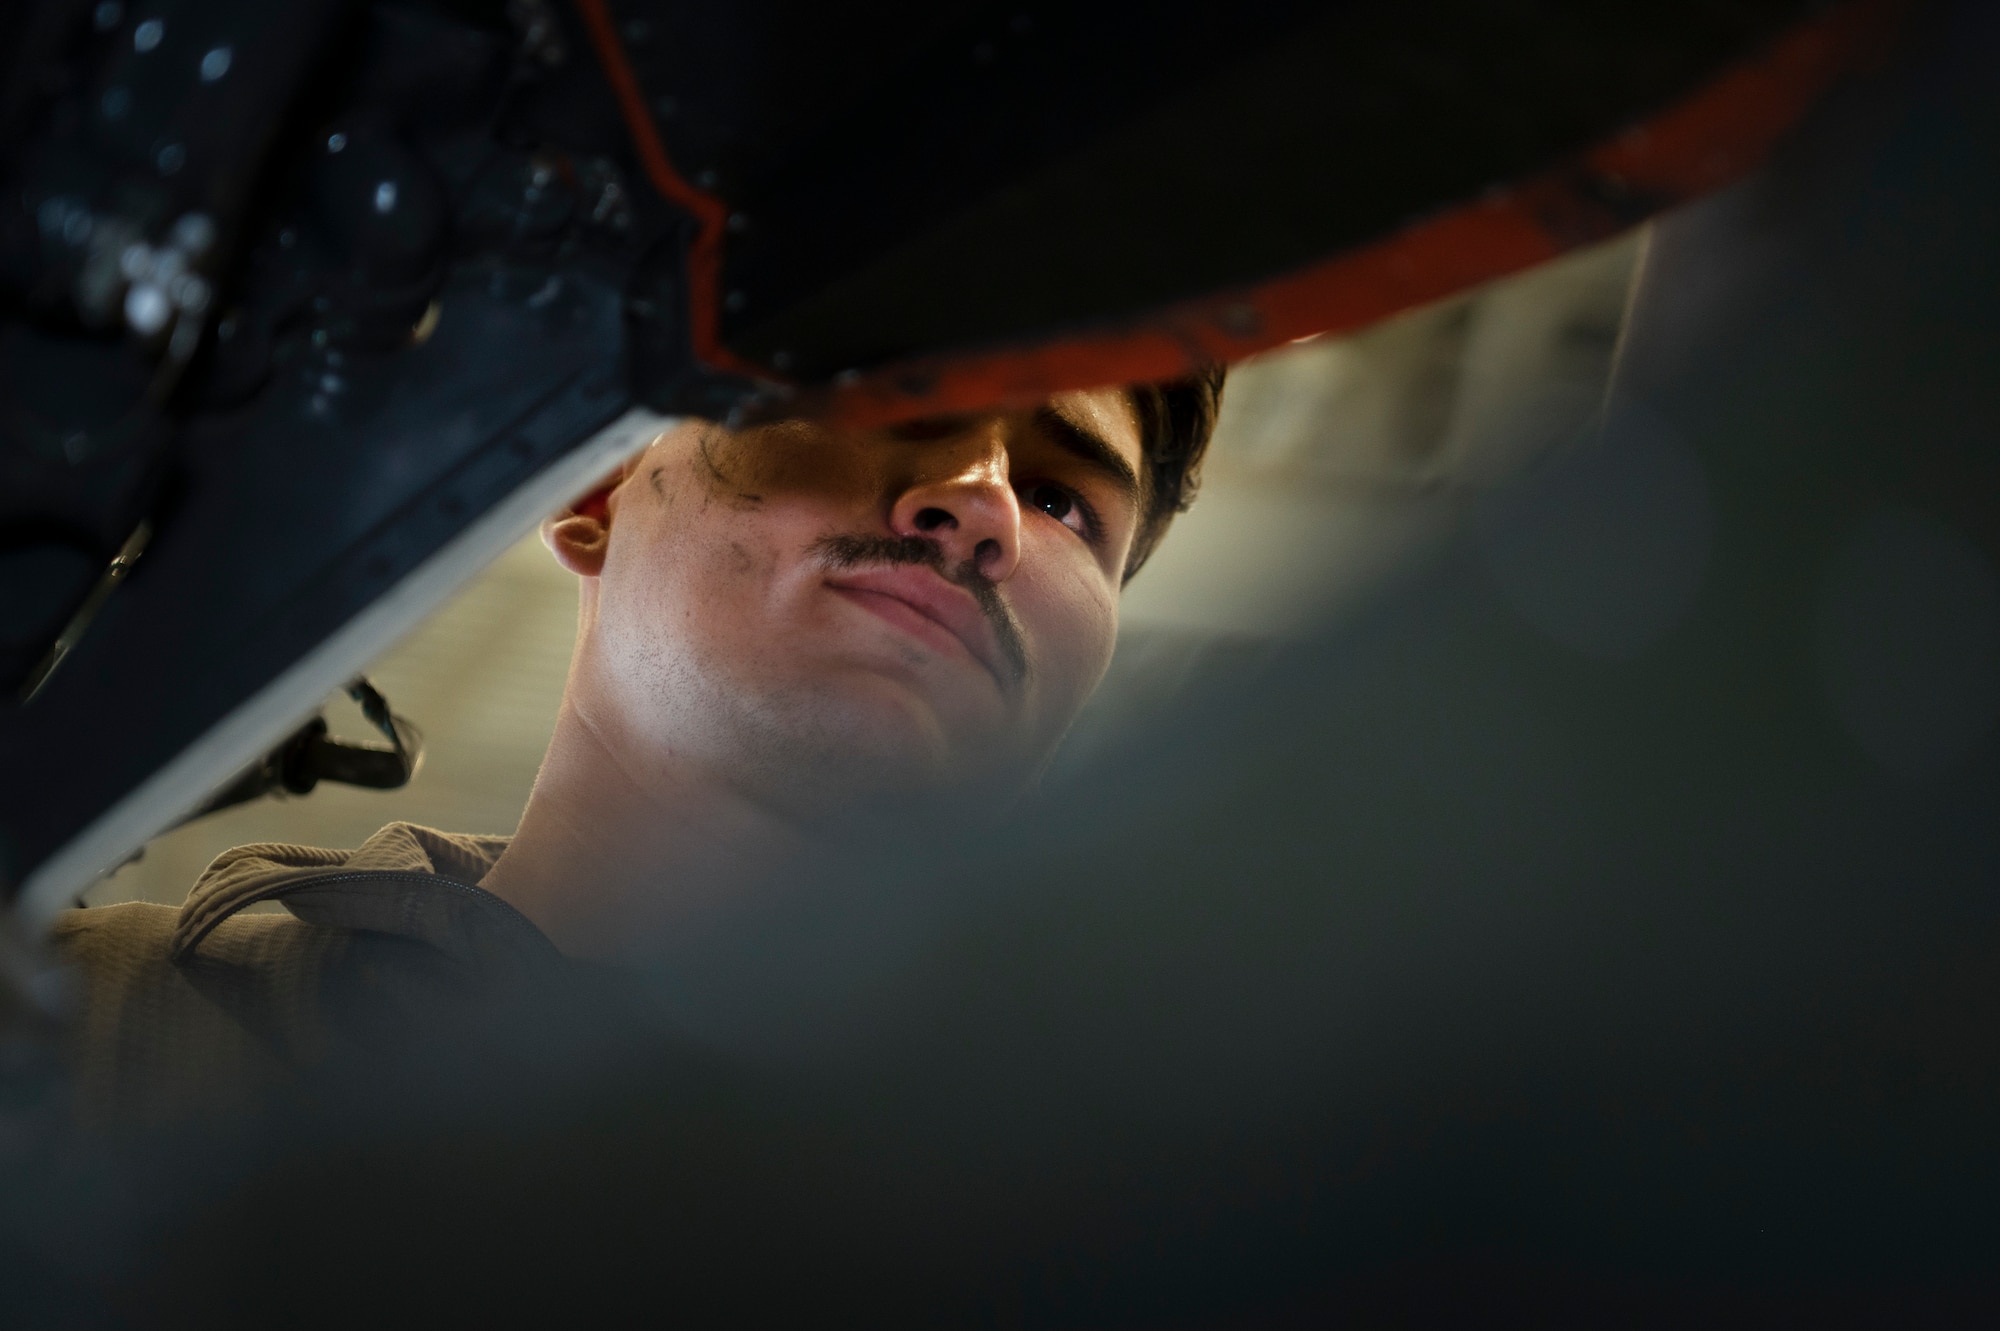 Senior Airman Thomas Perez, an 801st Special Operations Aircraft Maintenance Squadron CV-22 Osprey crew chief, reviews after installing an inboard proprotor gearbox horizontal fire baffle at Independence Hangar on Hurlburt Field, Fla., Feb15, 2022. The 801st SOAMXS's mission is to perform all equipment maintenance in support of worldwide special operations missions in response to national command authority taskings for the CV-22 Osprey supporting the 8th Special Operations Squadron.